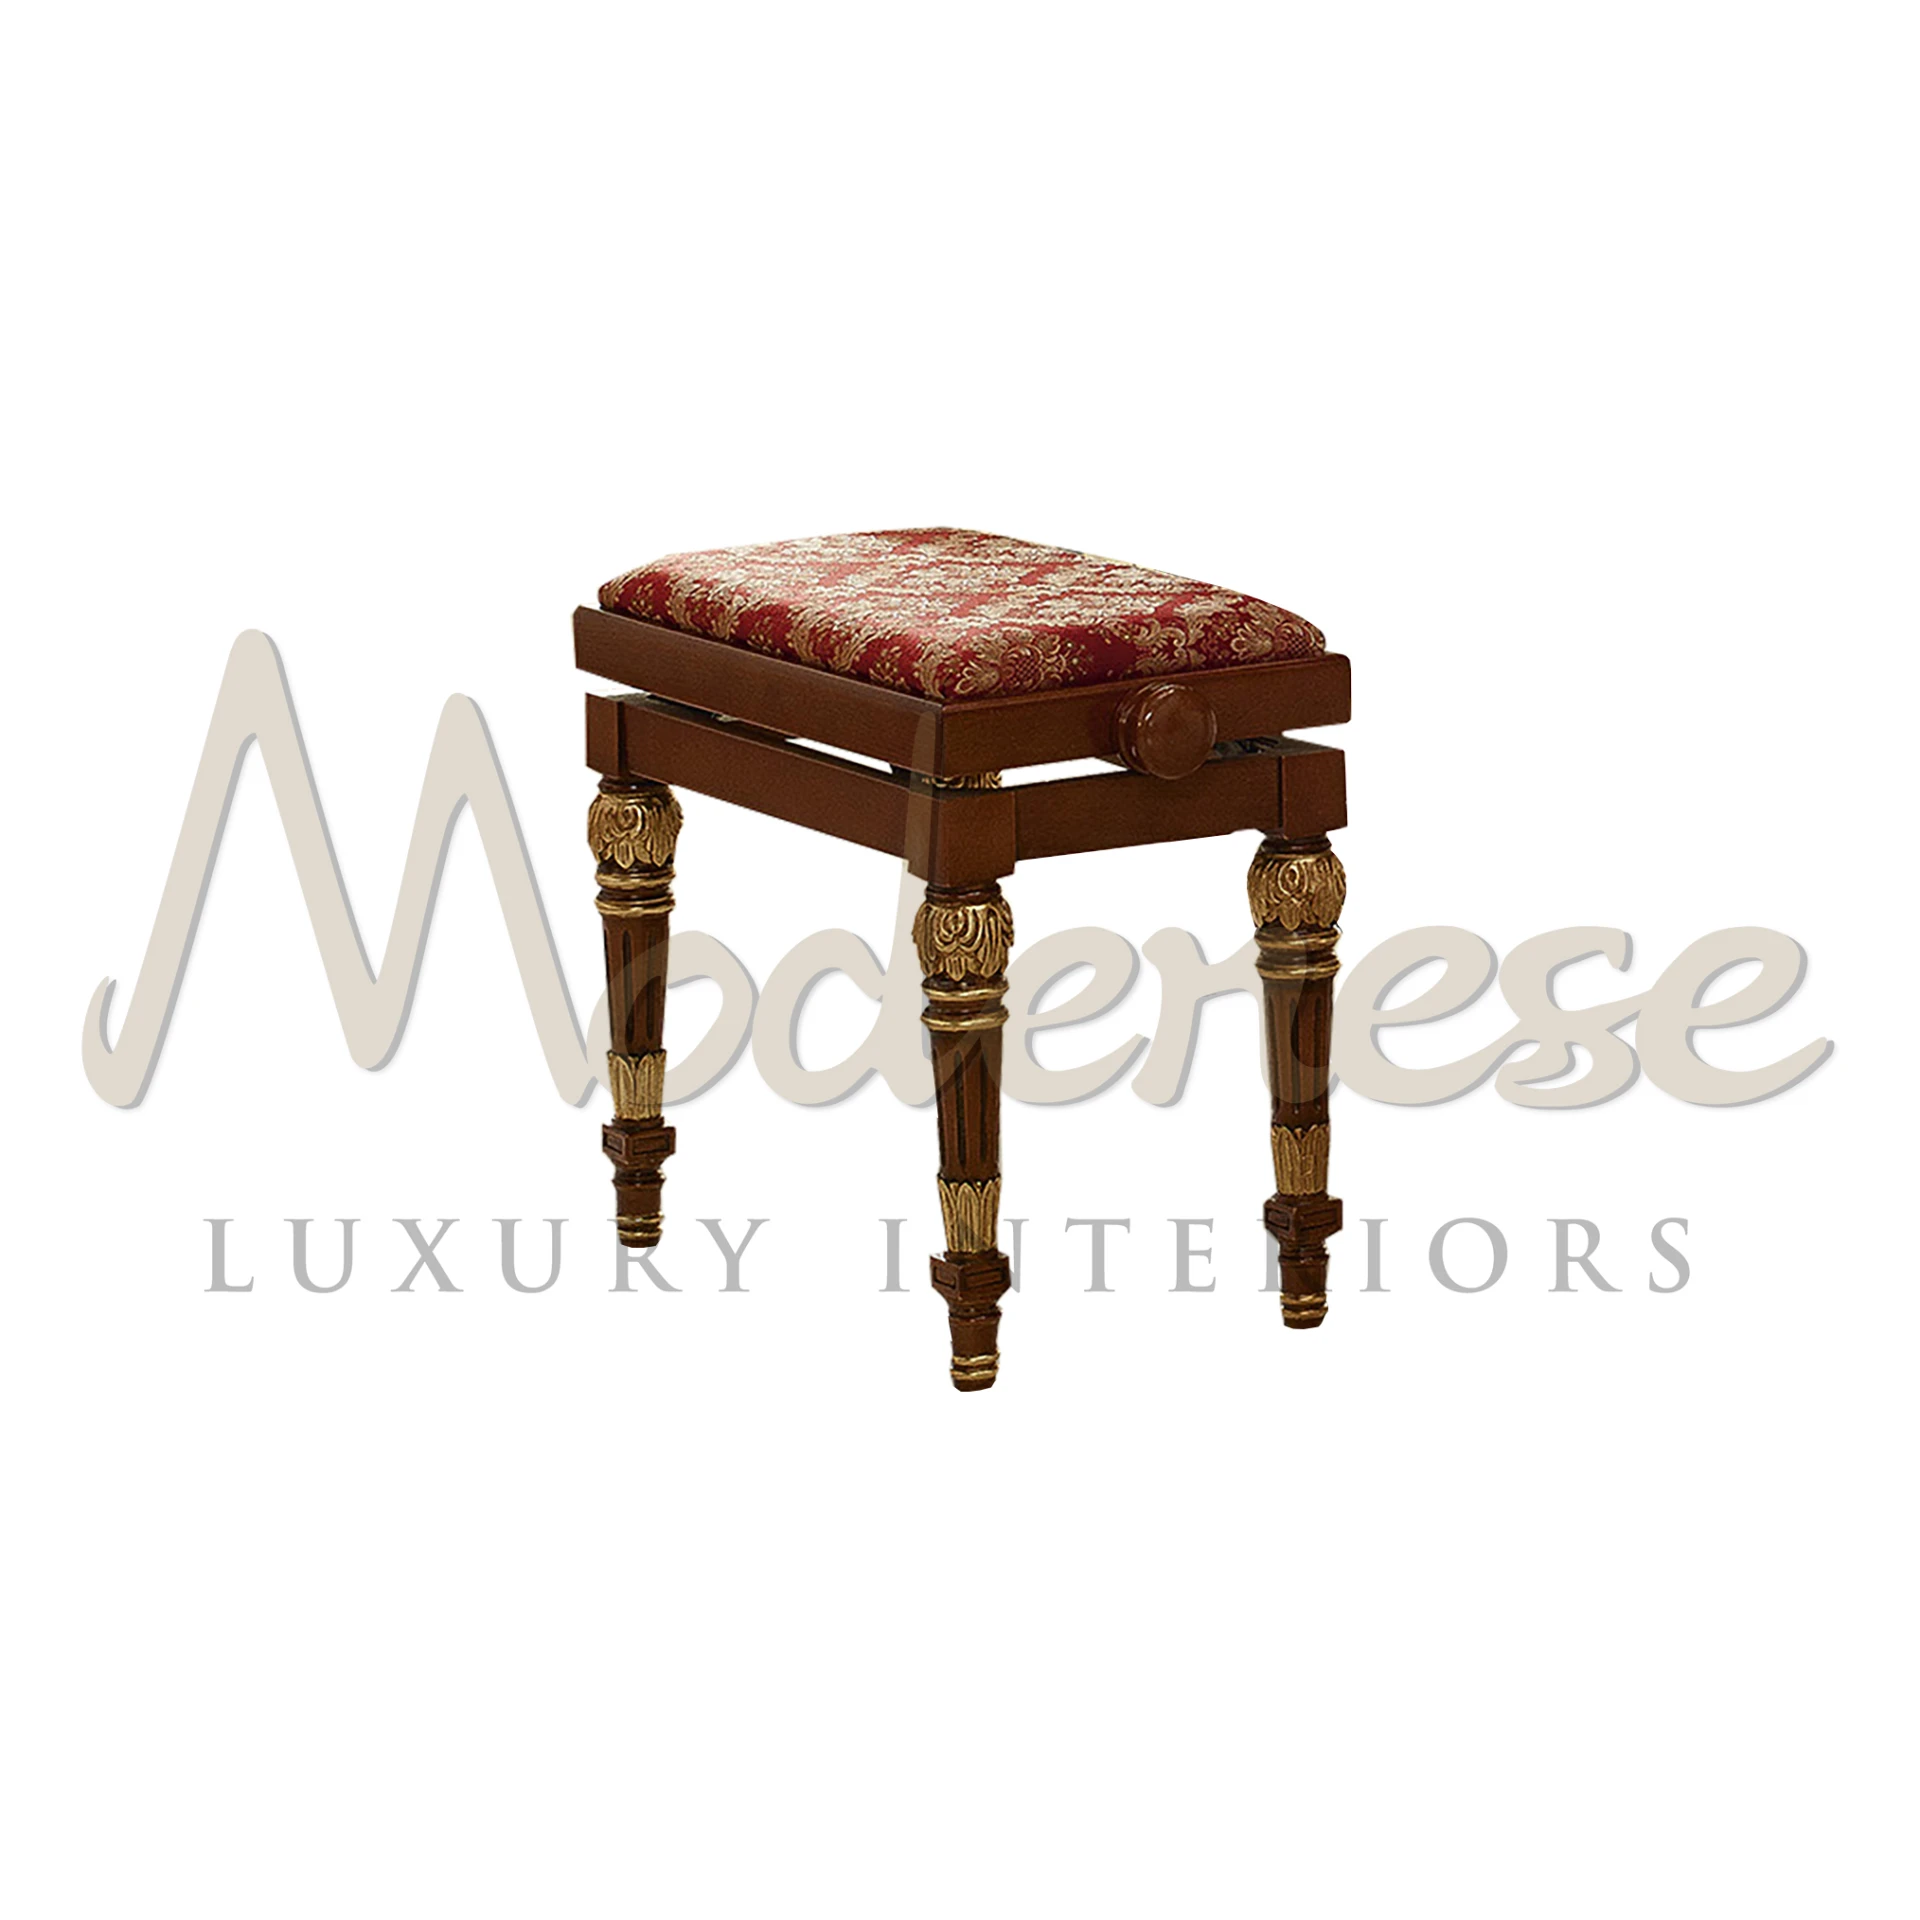 Opulent Comfort: Imperial Piano Stool with Damask Fabric Upholstery